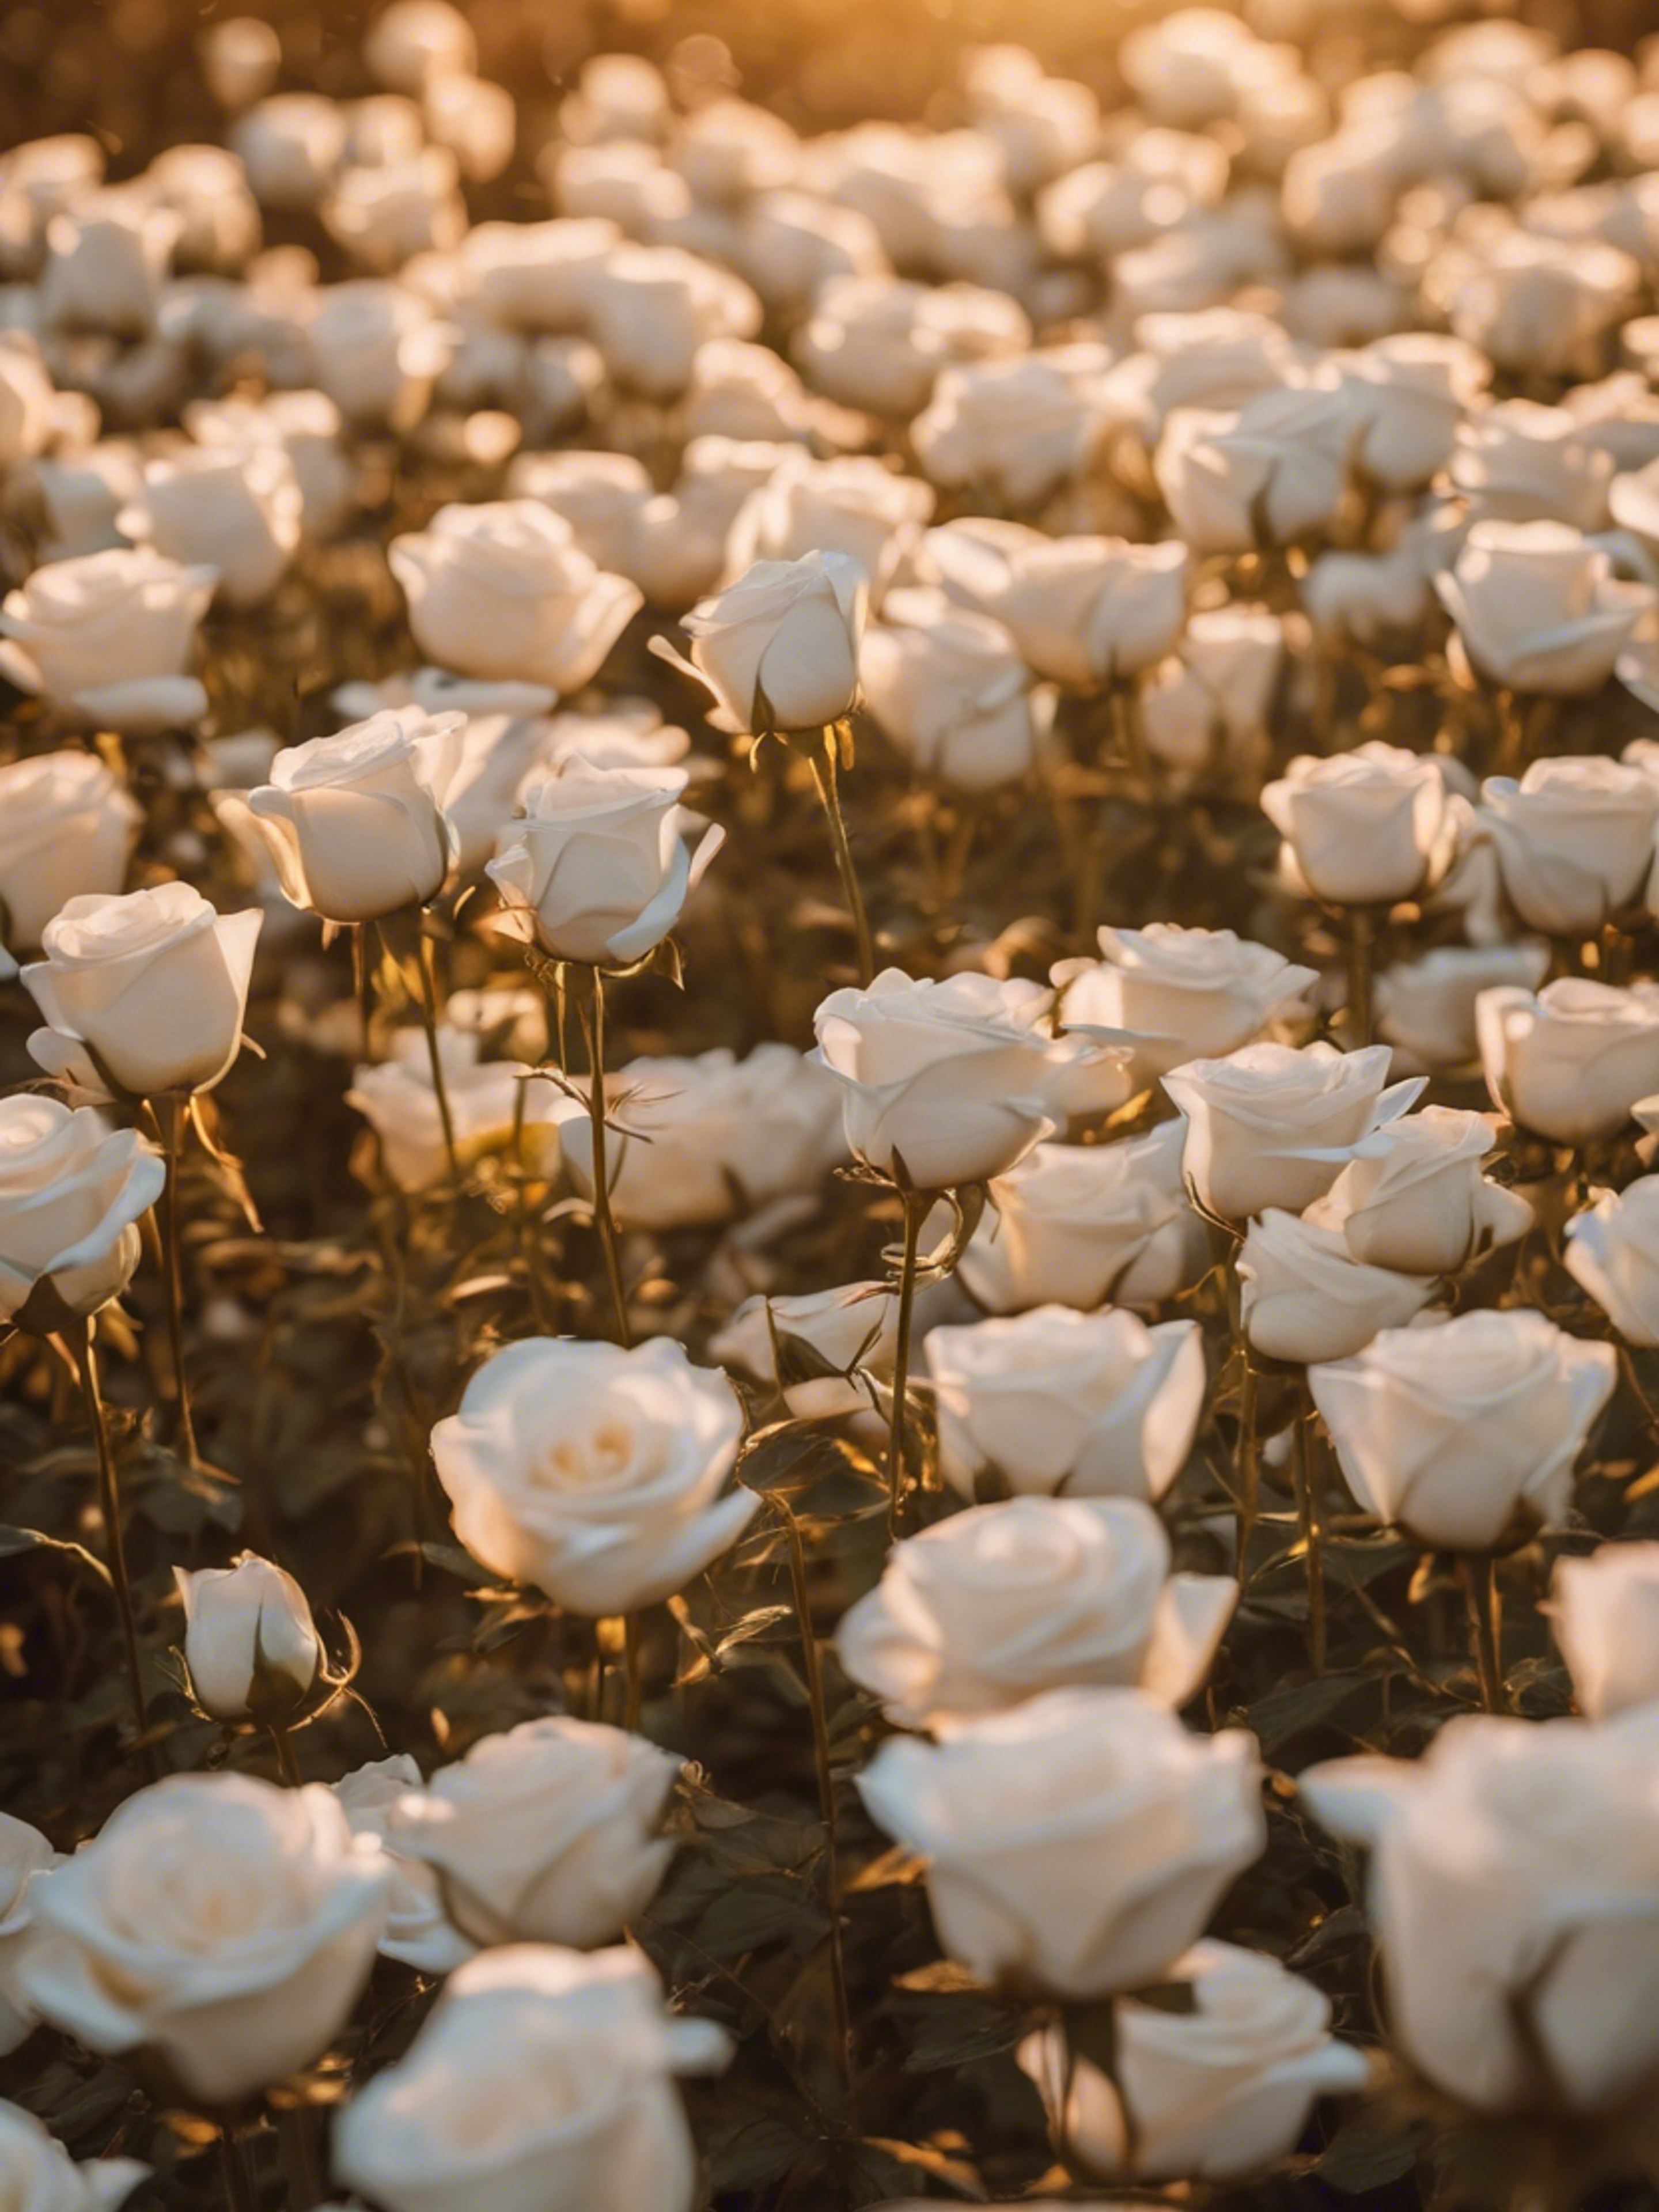 A field aglow with countless white roses bathed in golden sunset light.壁紙[792b3d5e9ba948139ba1]